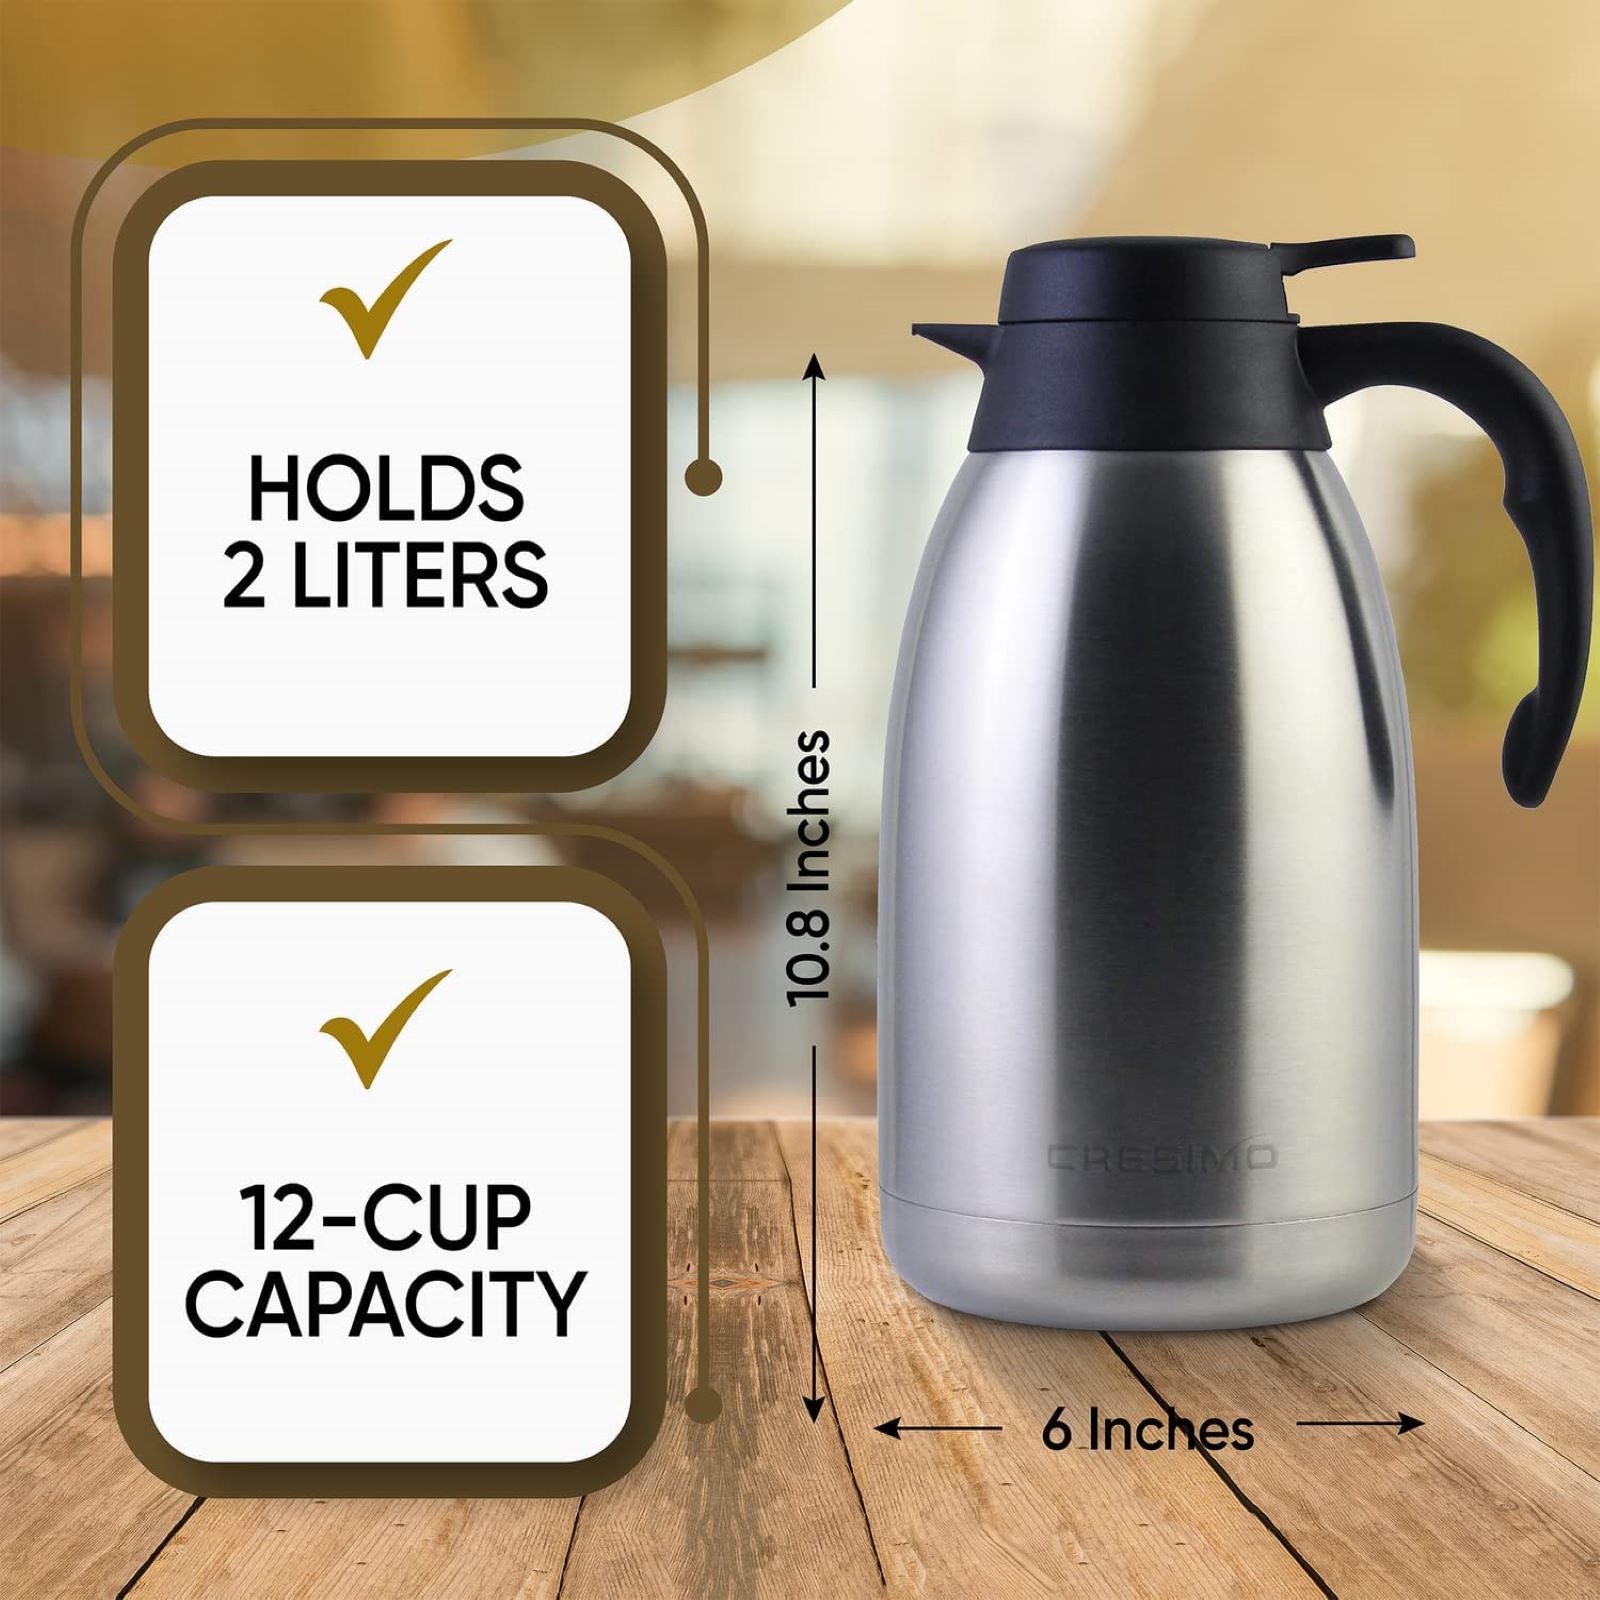 68 Oz Thermal Coffee Carafe,2 Liter Stainless Steel Thermos Carafe